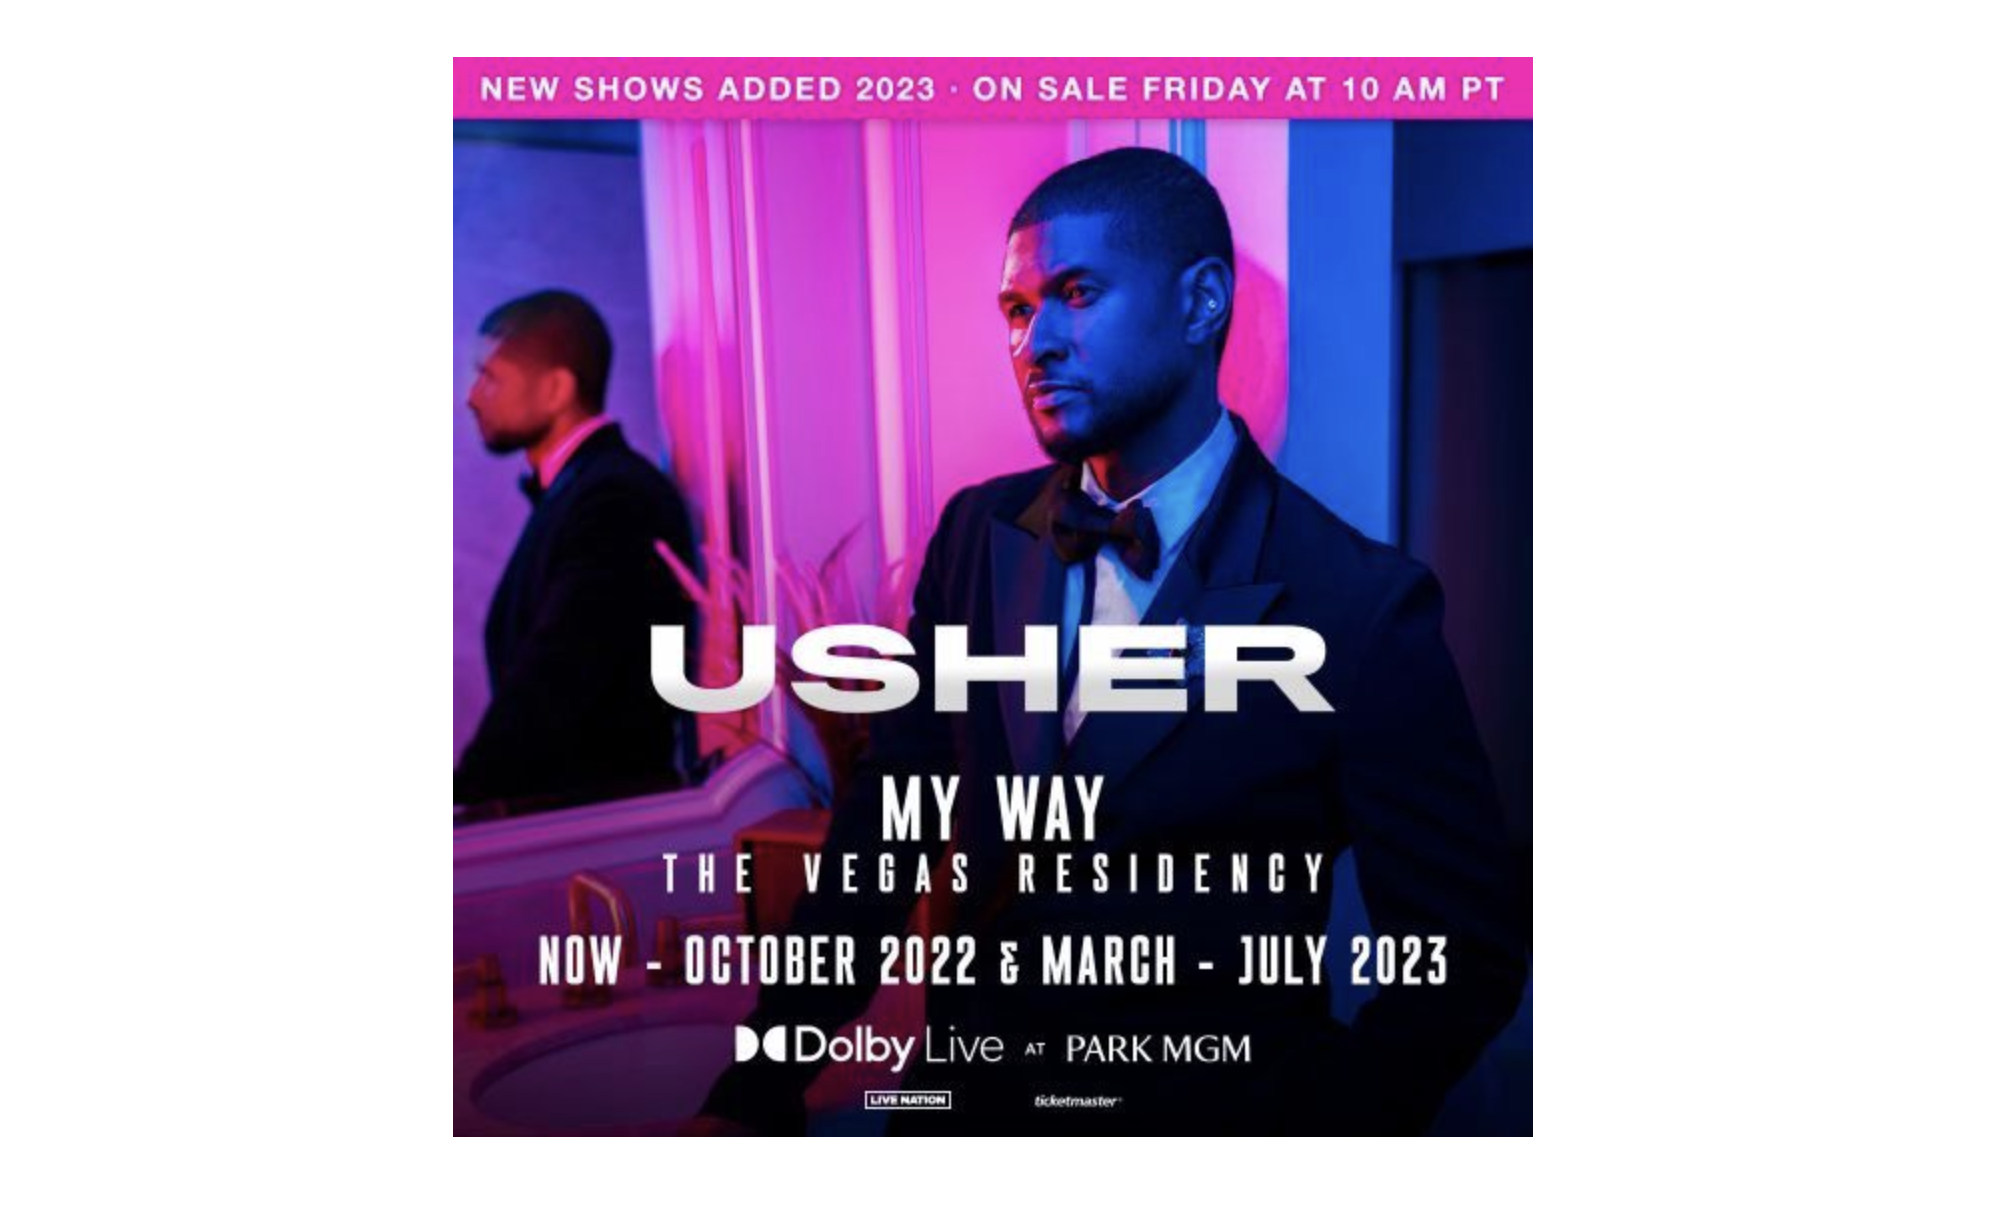 Usher Announces New Dates for Las Vegas Residency "Usher My Way The